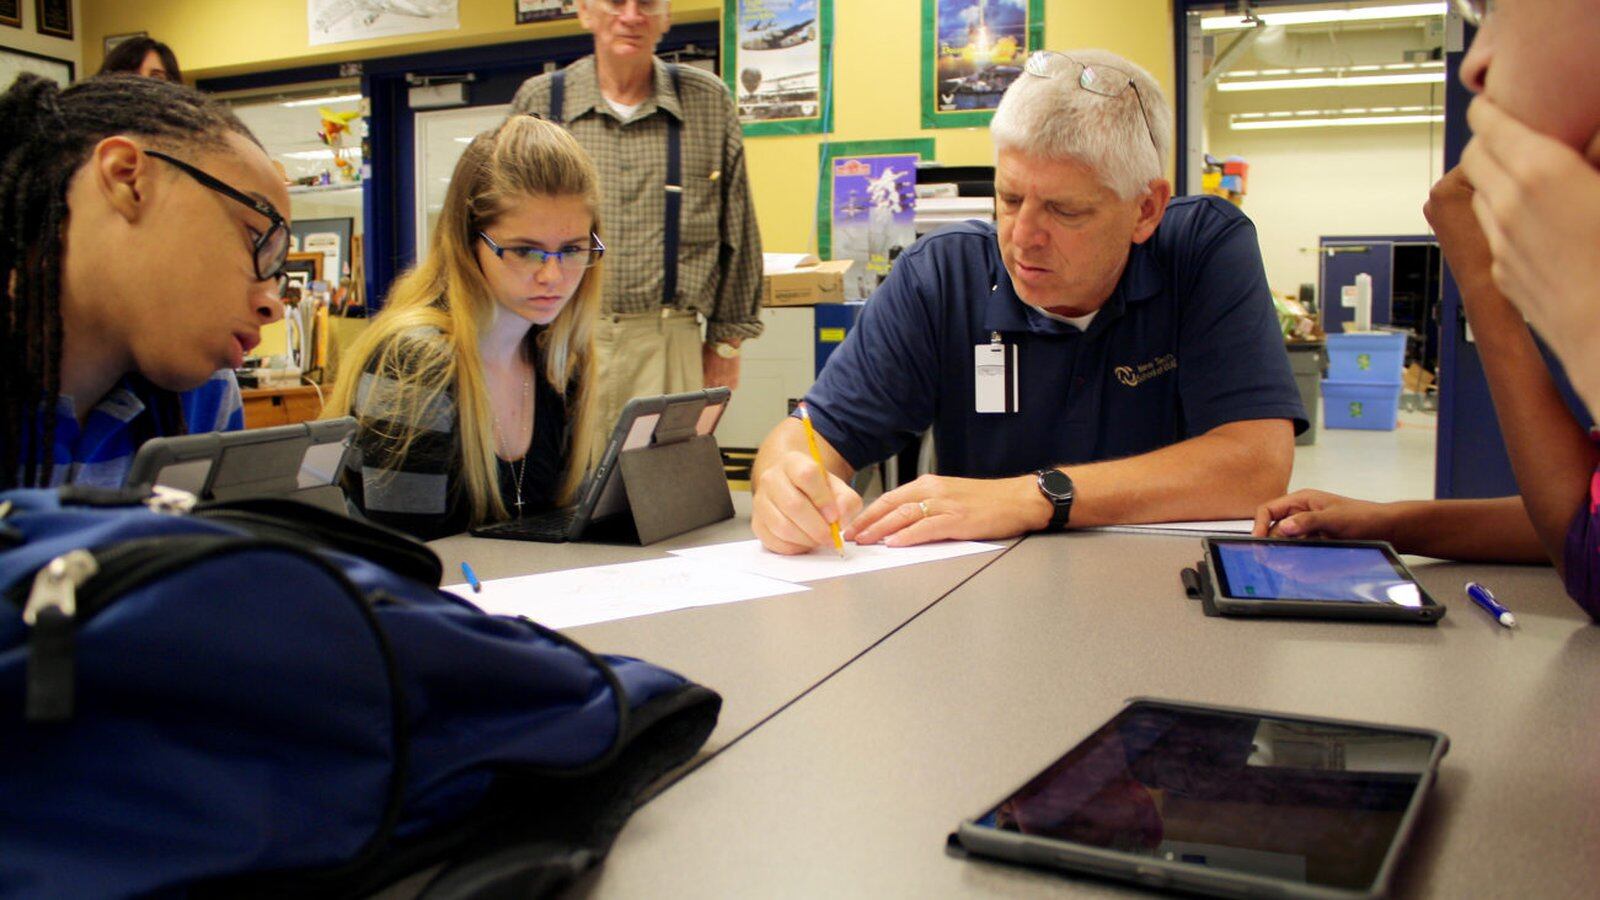 Students in Decatur Township work on physics problems with their teacher.